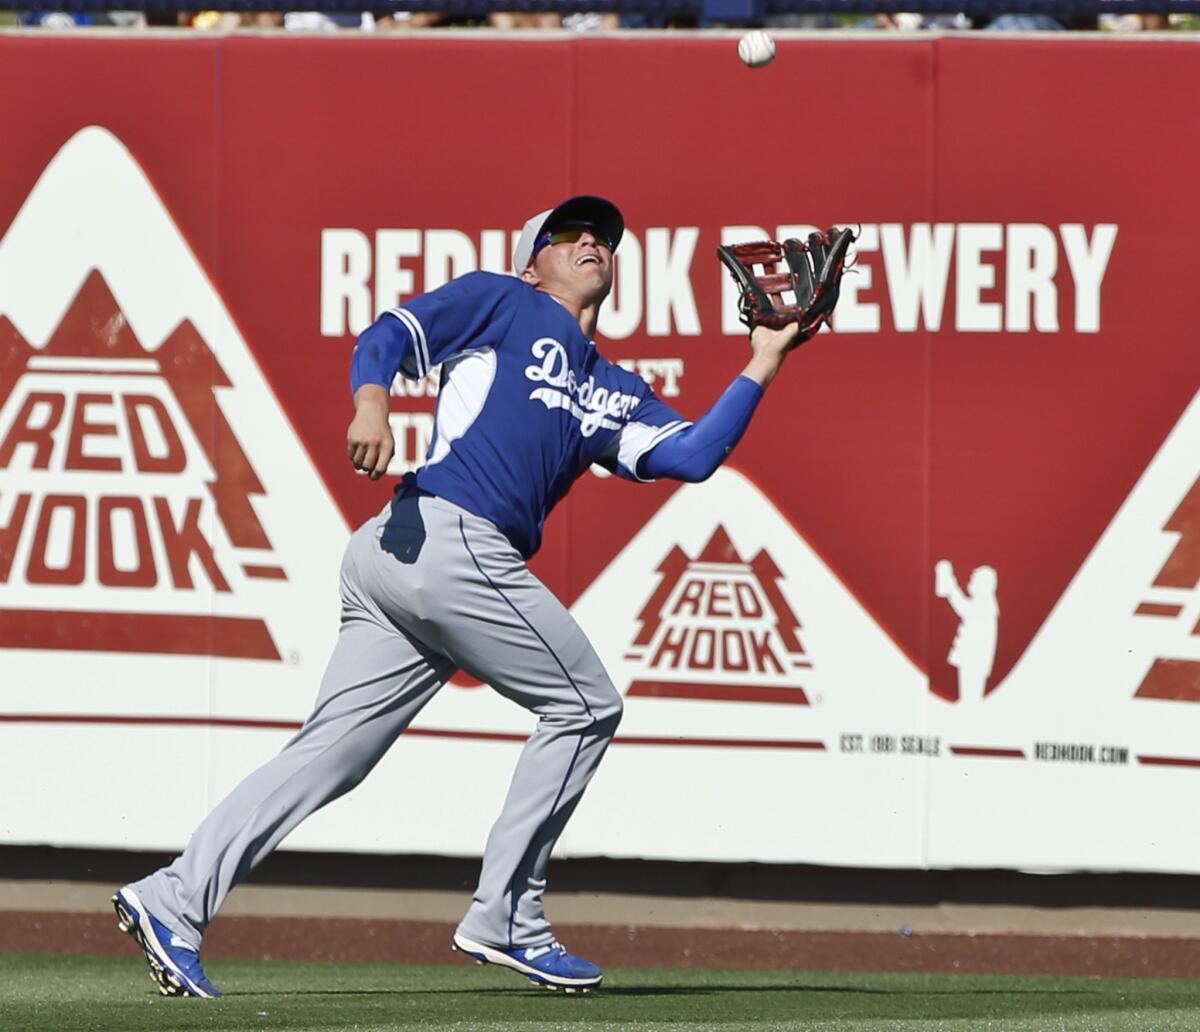 Dodgers utilityman Enrique Hernandez hit his third homer in three days Sunday against the Indians.